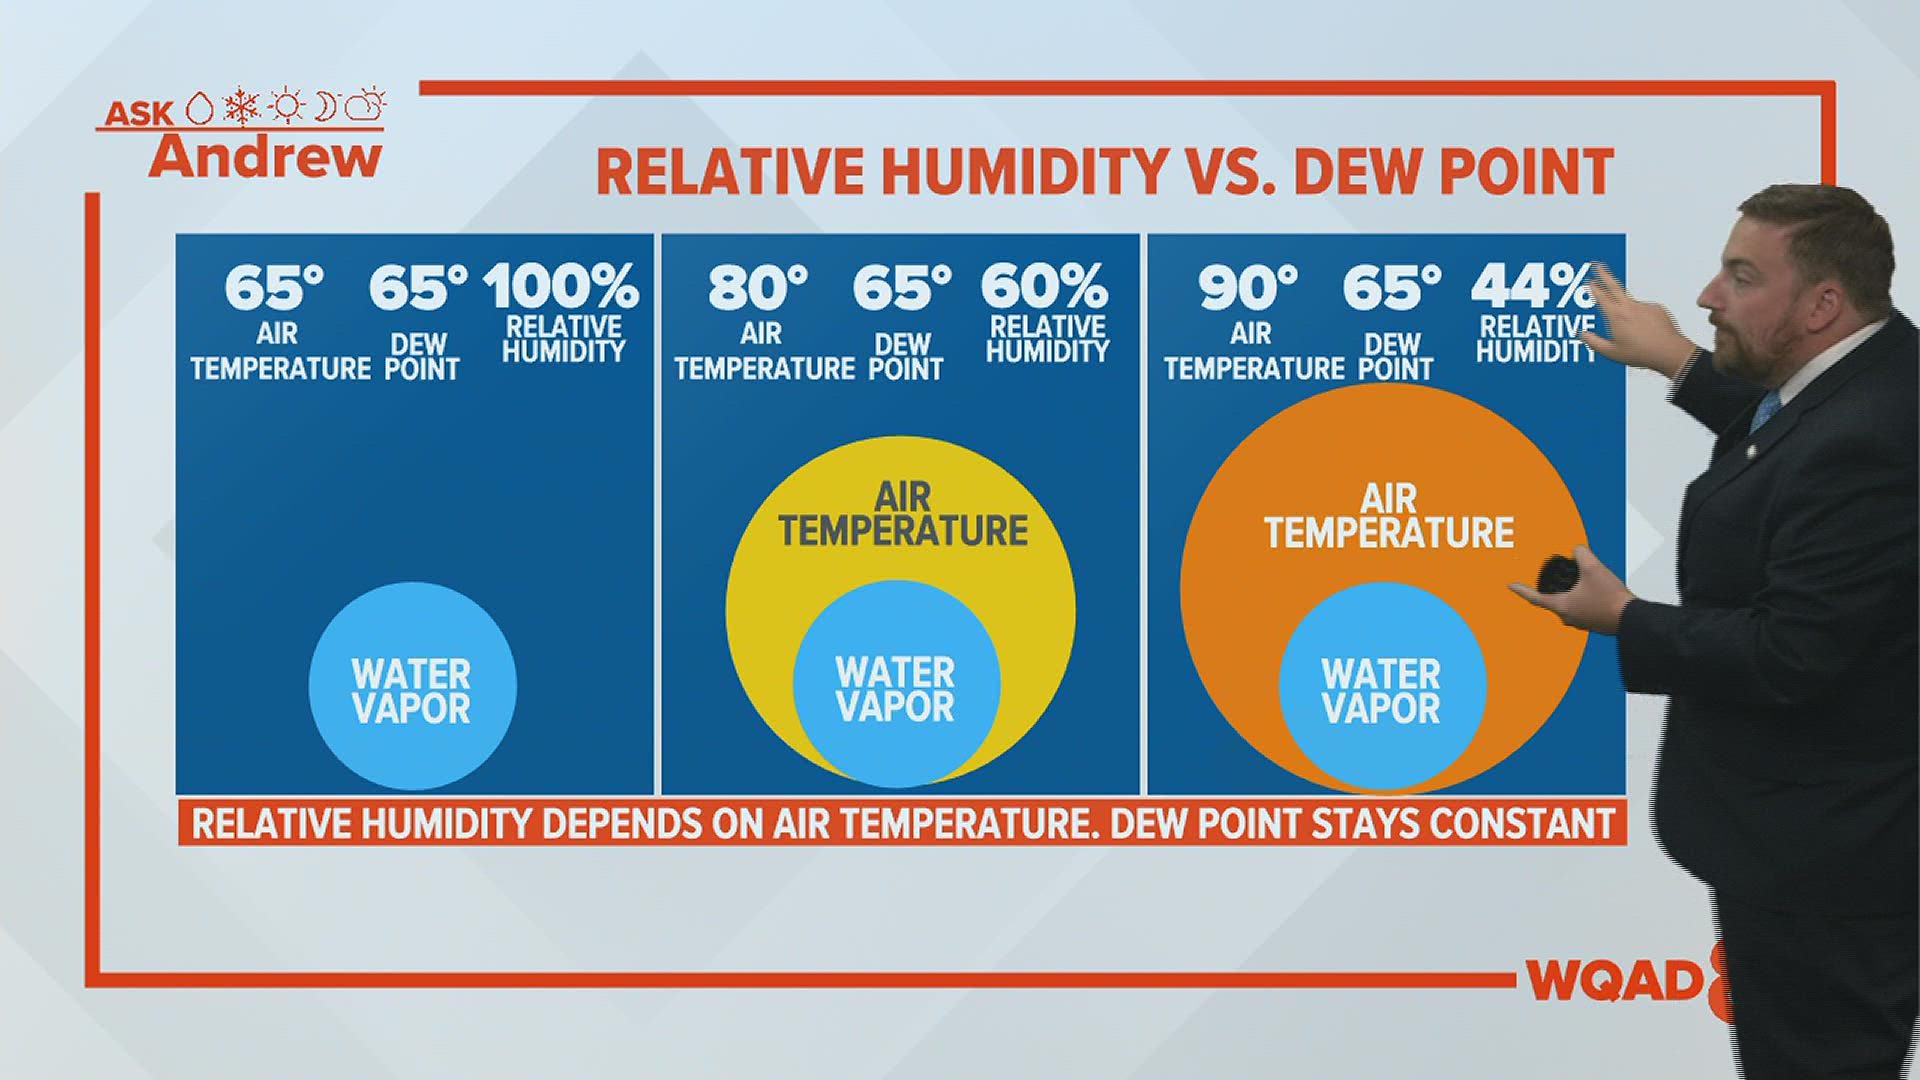 Humidity is dependent on the difference between the dew point temperature and the air temperature.